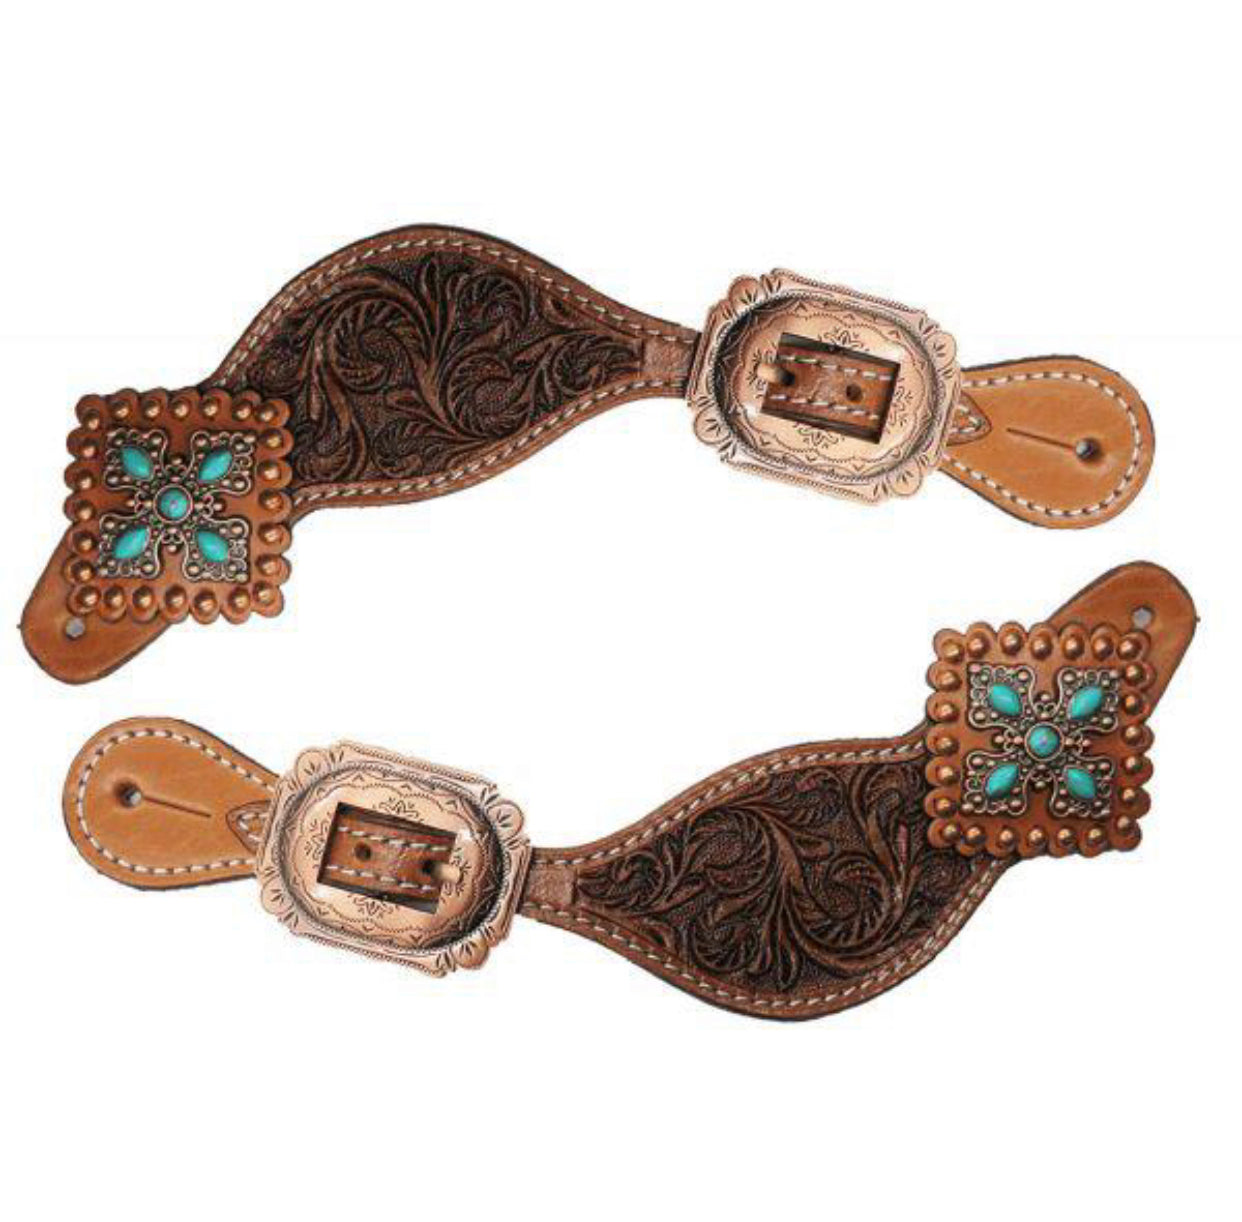 30848 - Tooled leather spur straps with vintage turquoise stone conchos